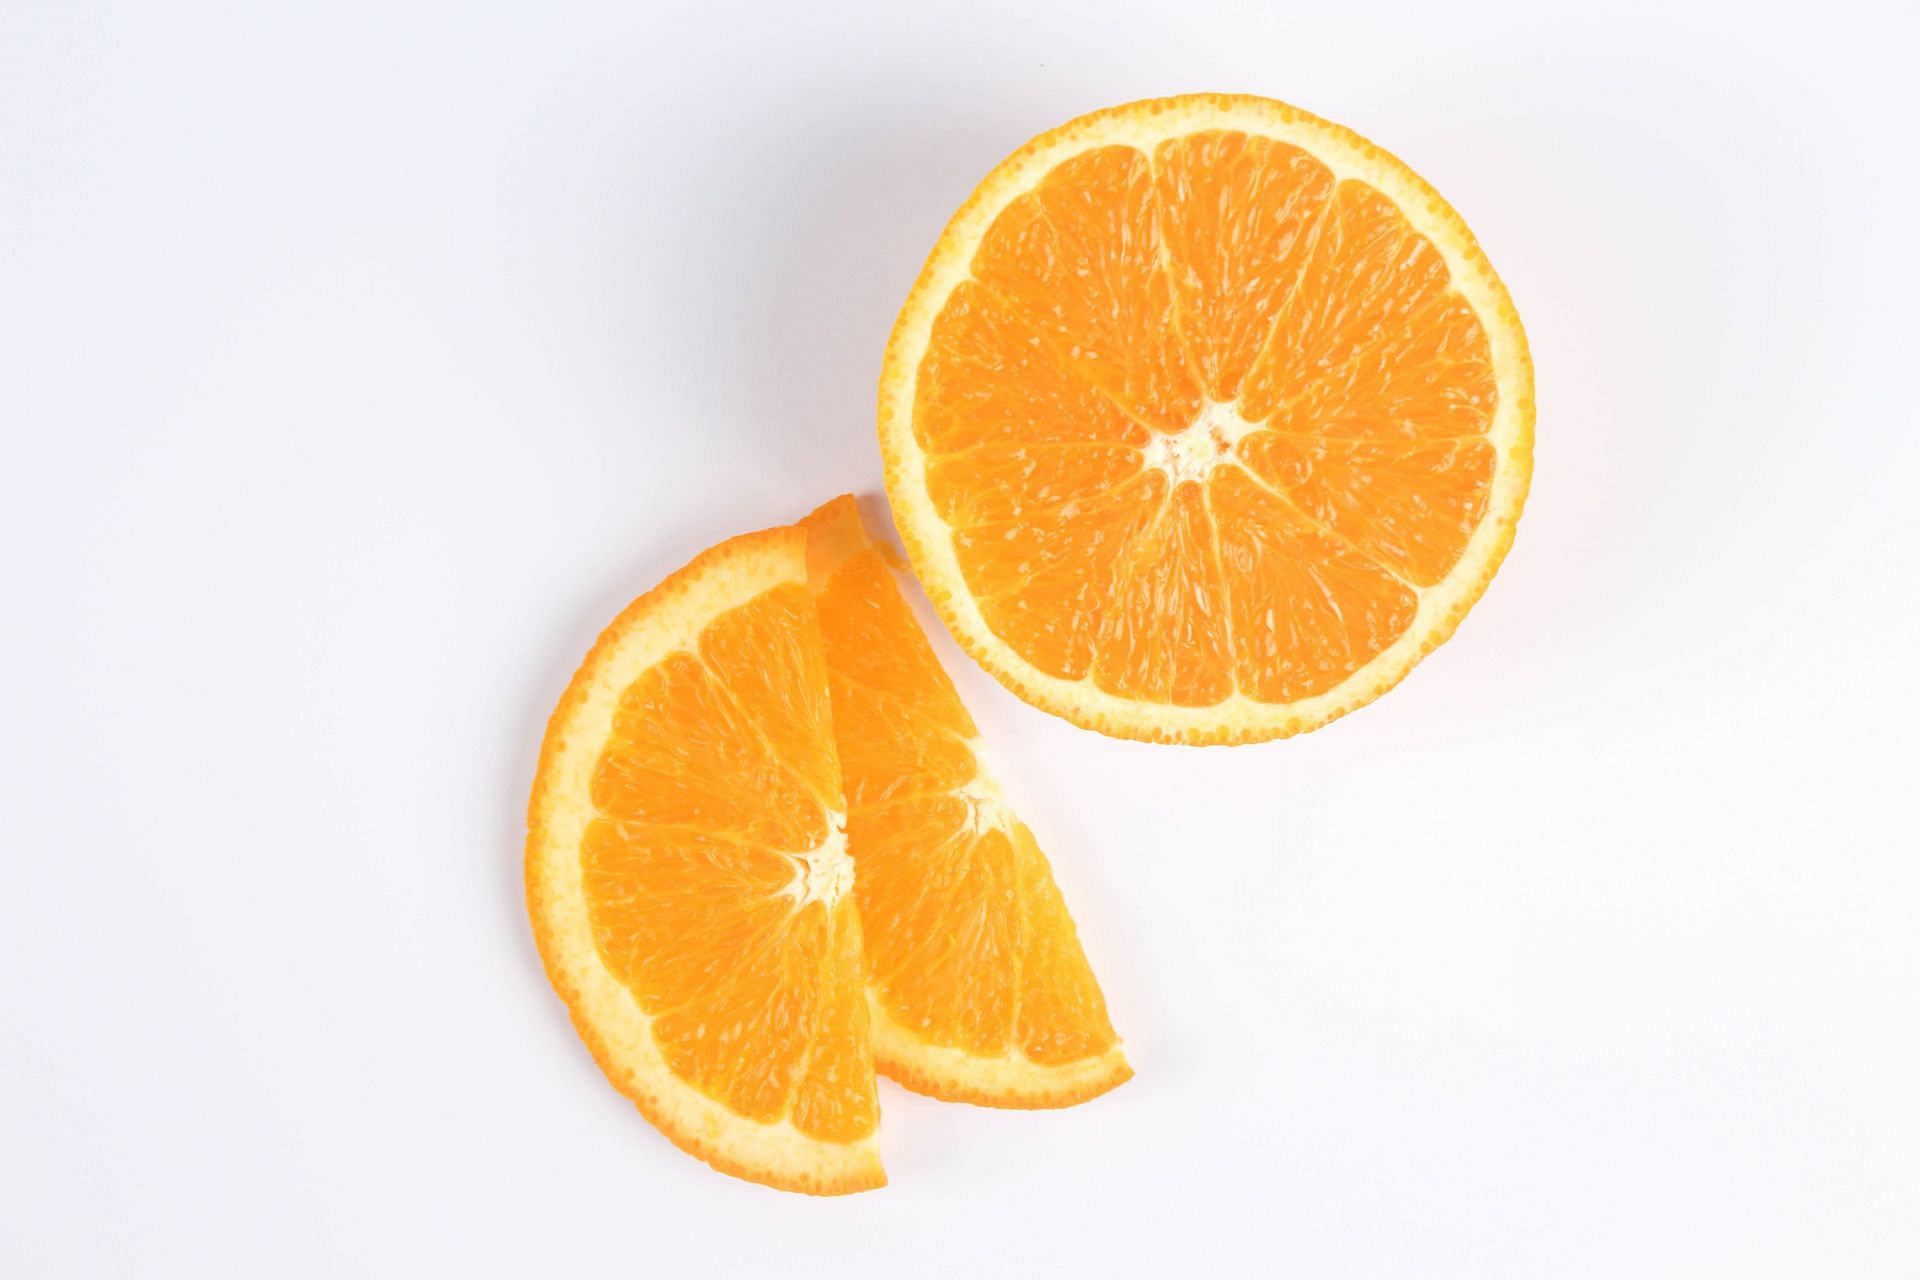 Oranges can be used to make one of the best detox for weight loss. (Image via Unsplash/Chuang Duong)